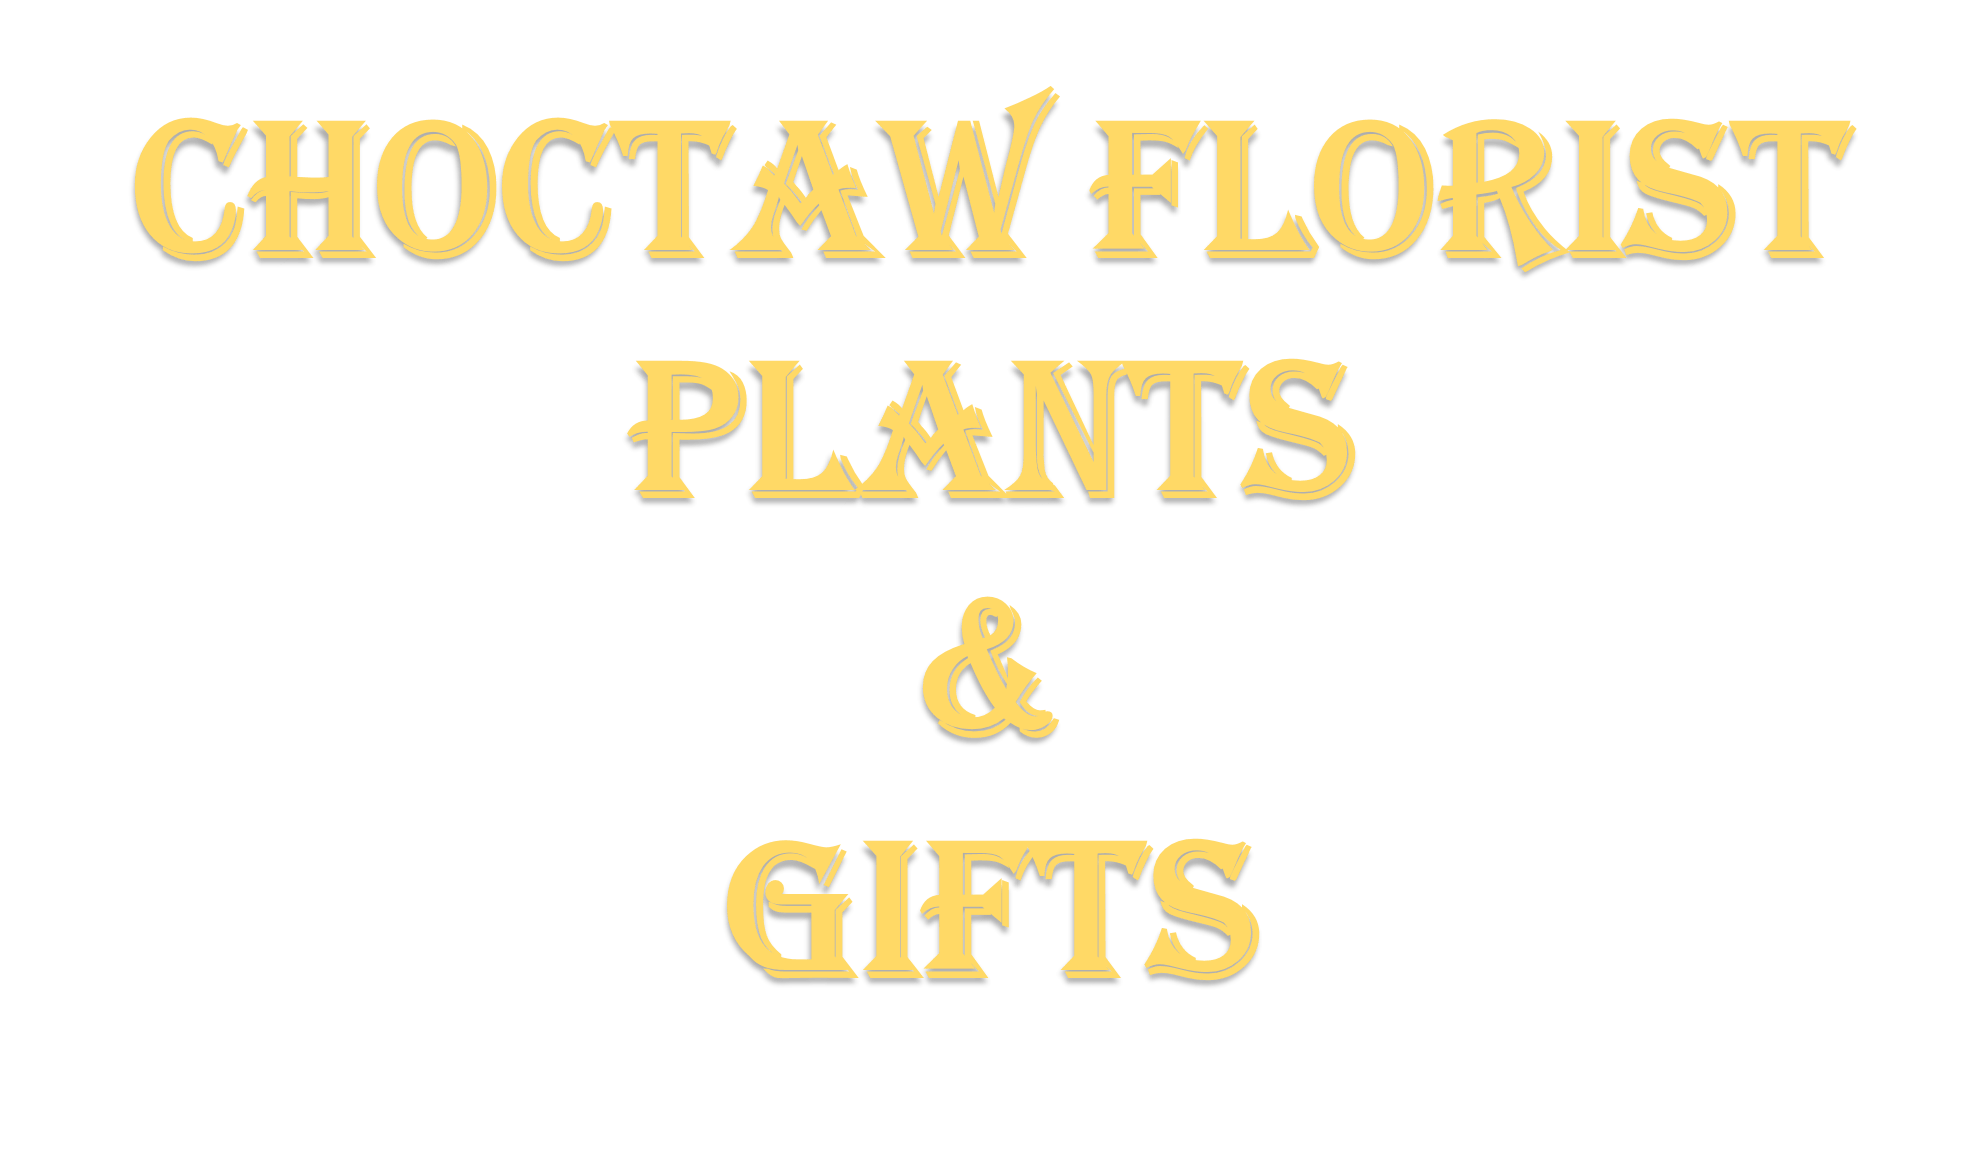 Choctaw Logo - Choctaw Florist Delivery by Choctaw Florist Plants & Gifts